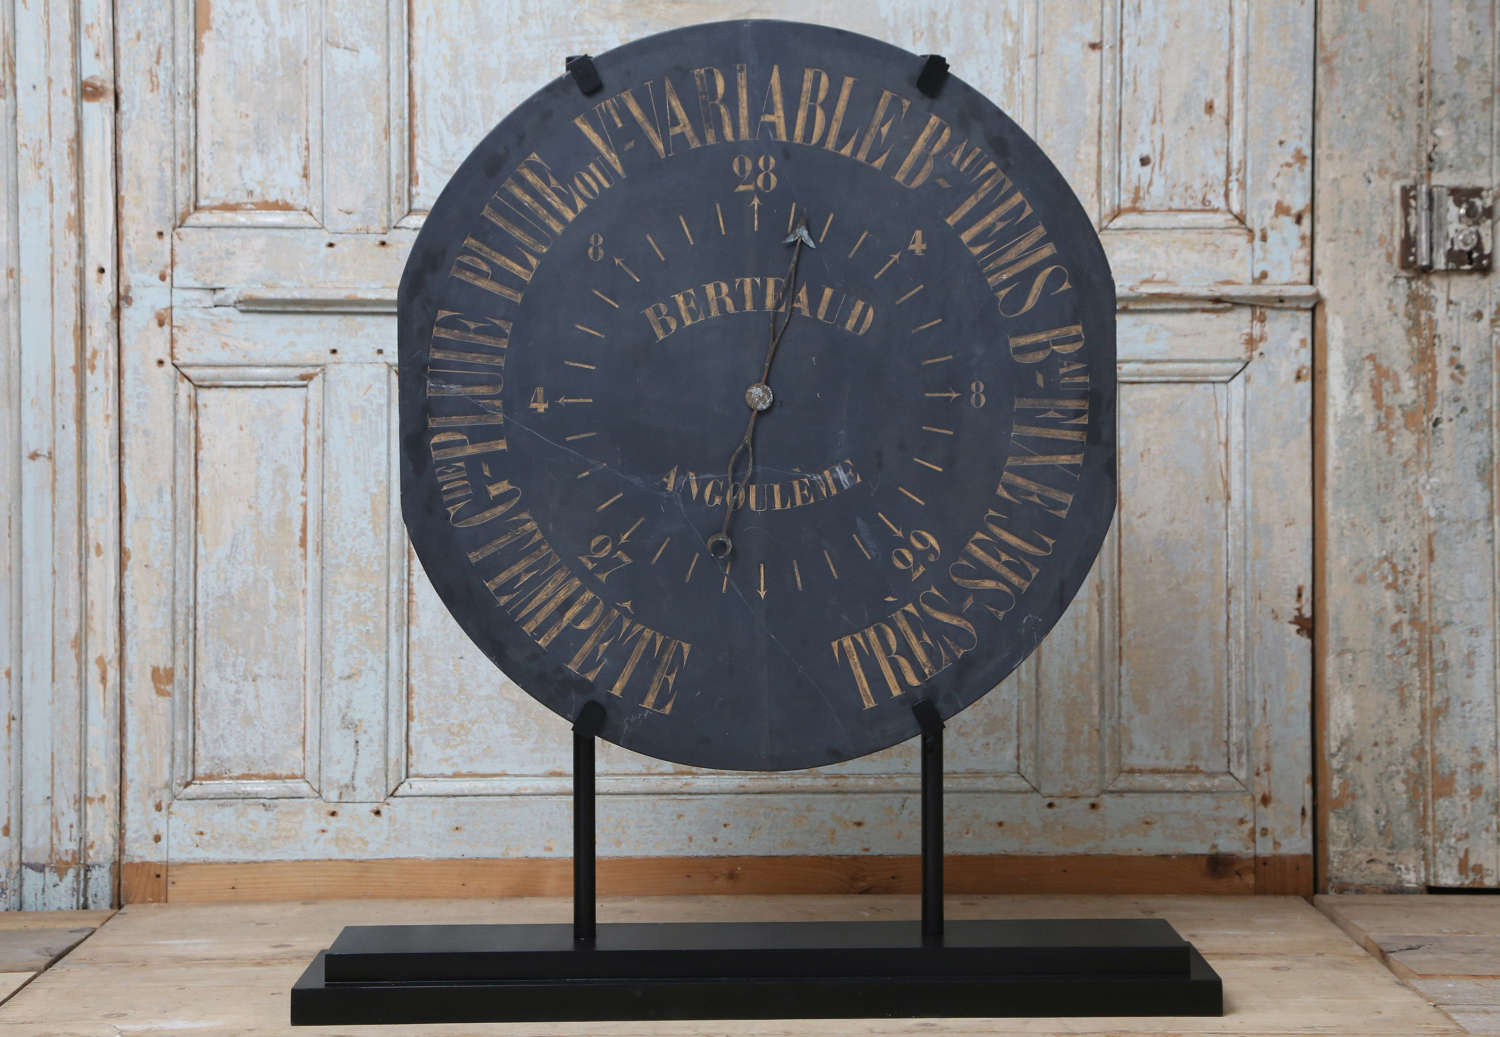 19th century French slate barometer face on a metal stand